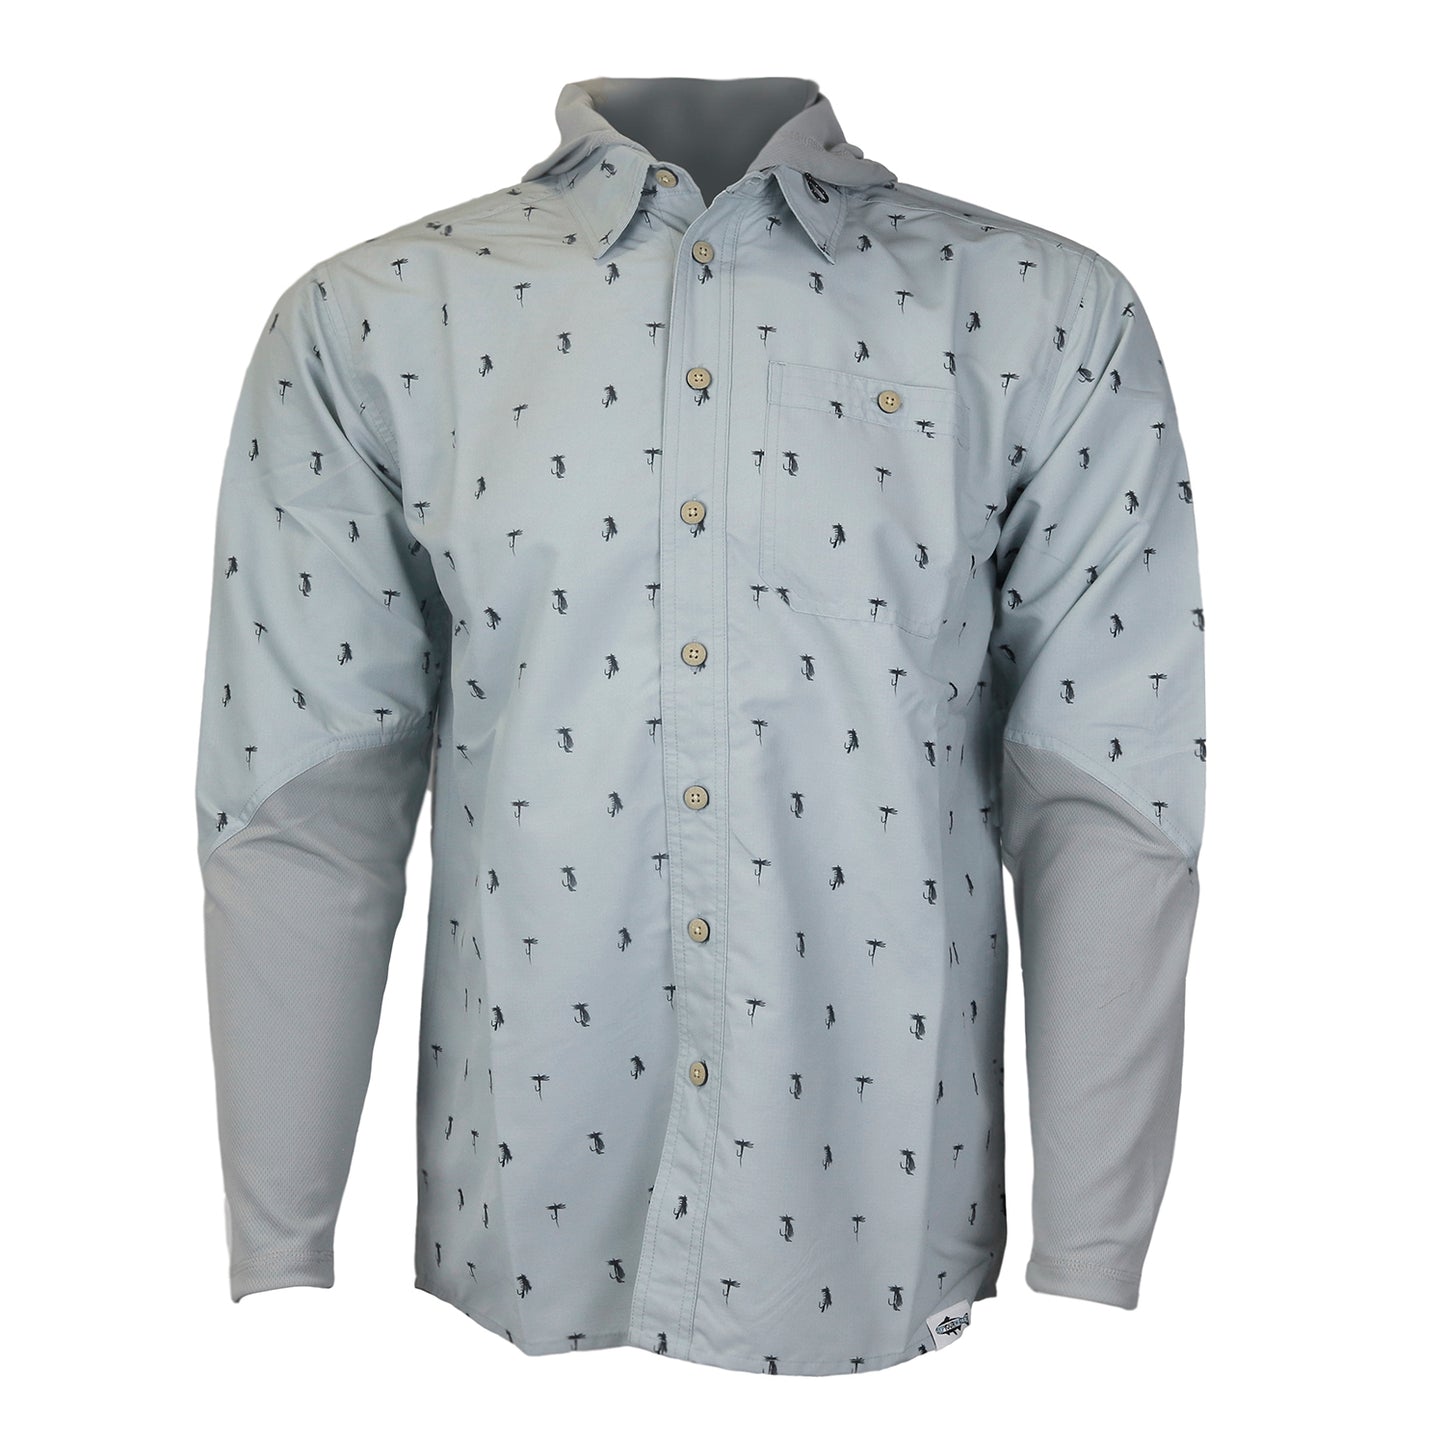 The front of a button up, light gray shirt with crew sleeves, a collar and a hood. The shirt has small dark gray dry flies printed all over it except for the crew sleeves.